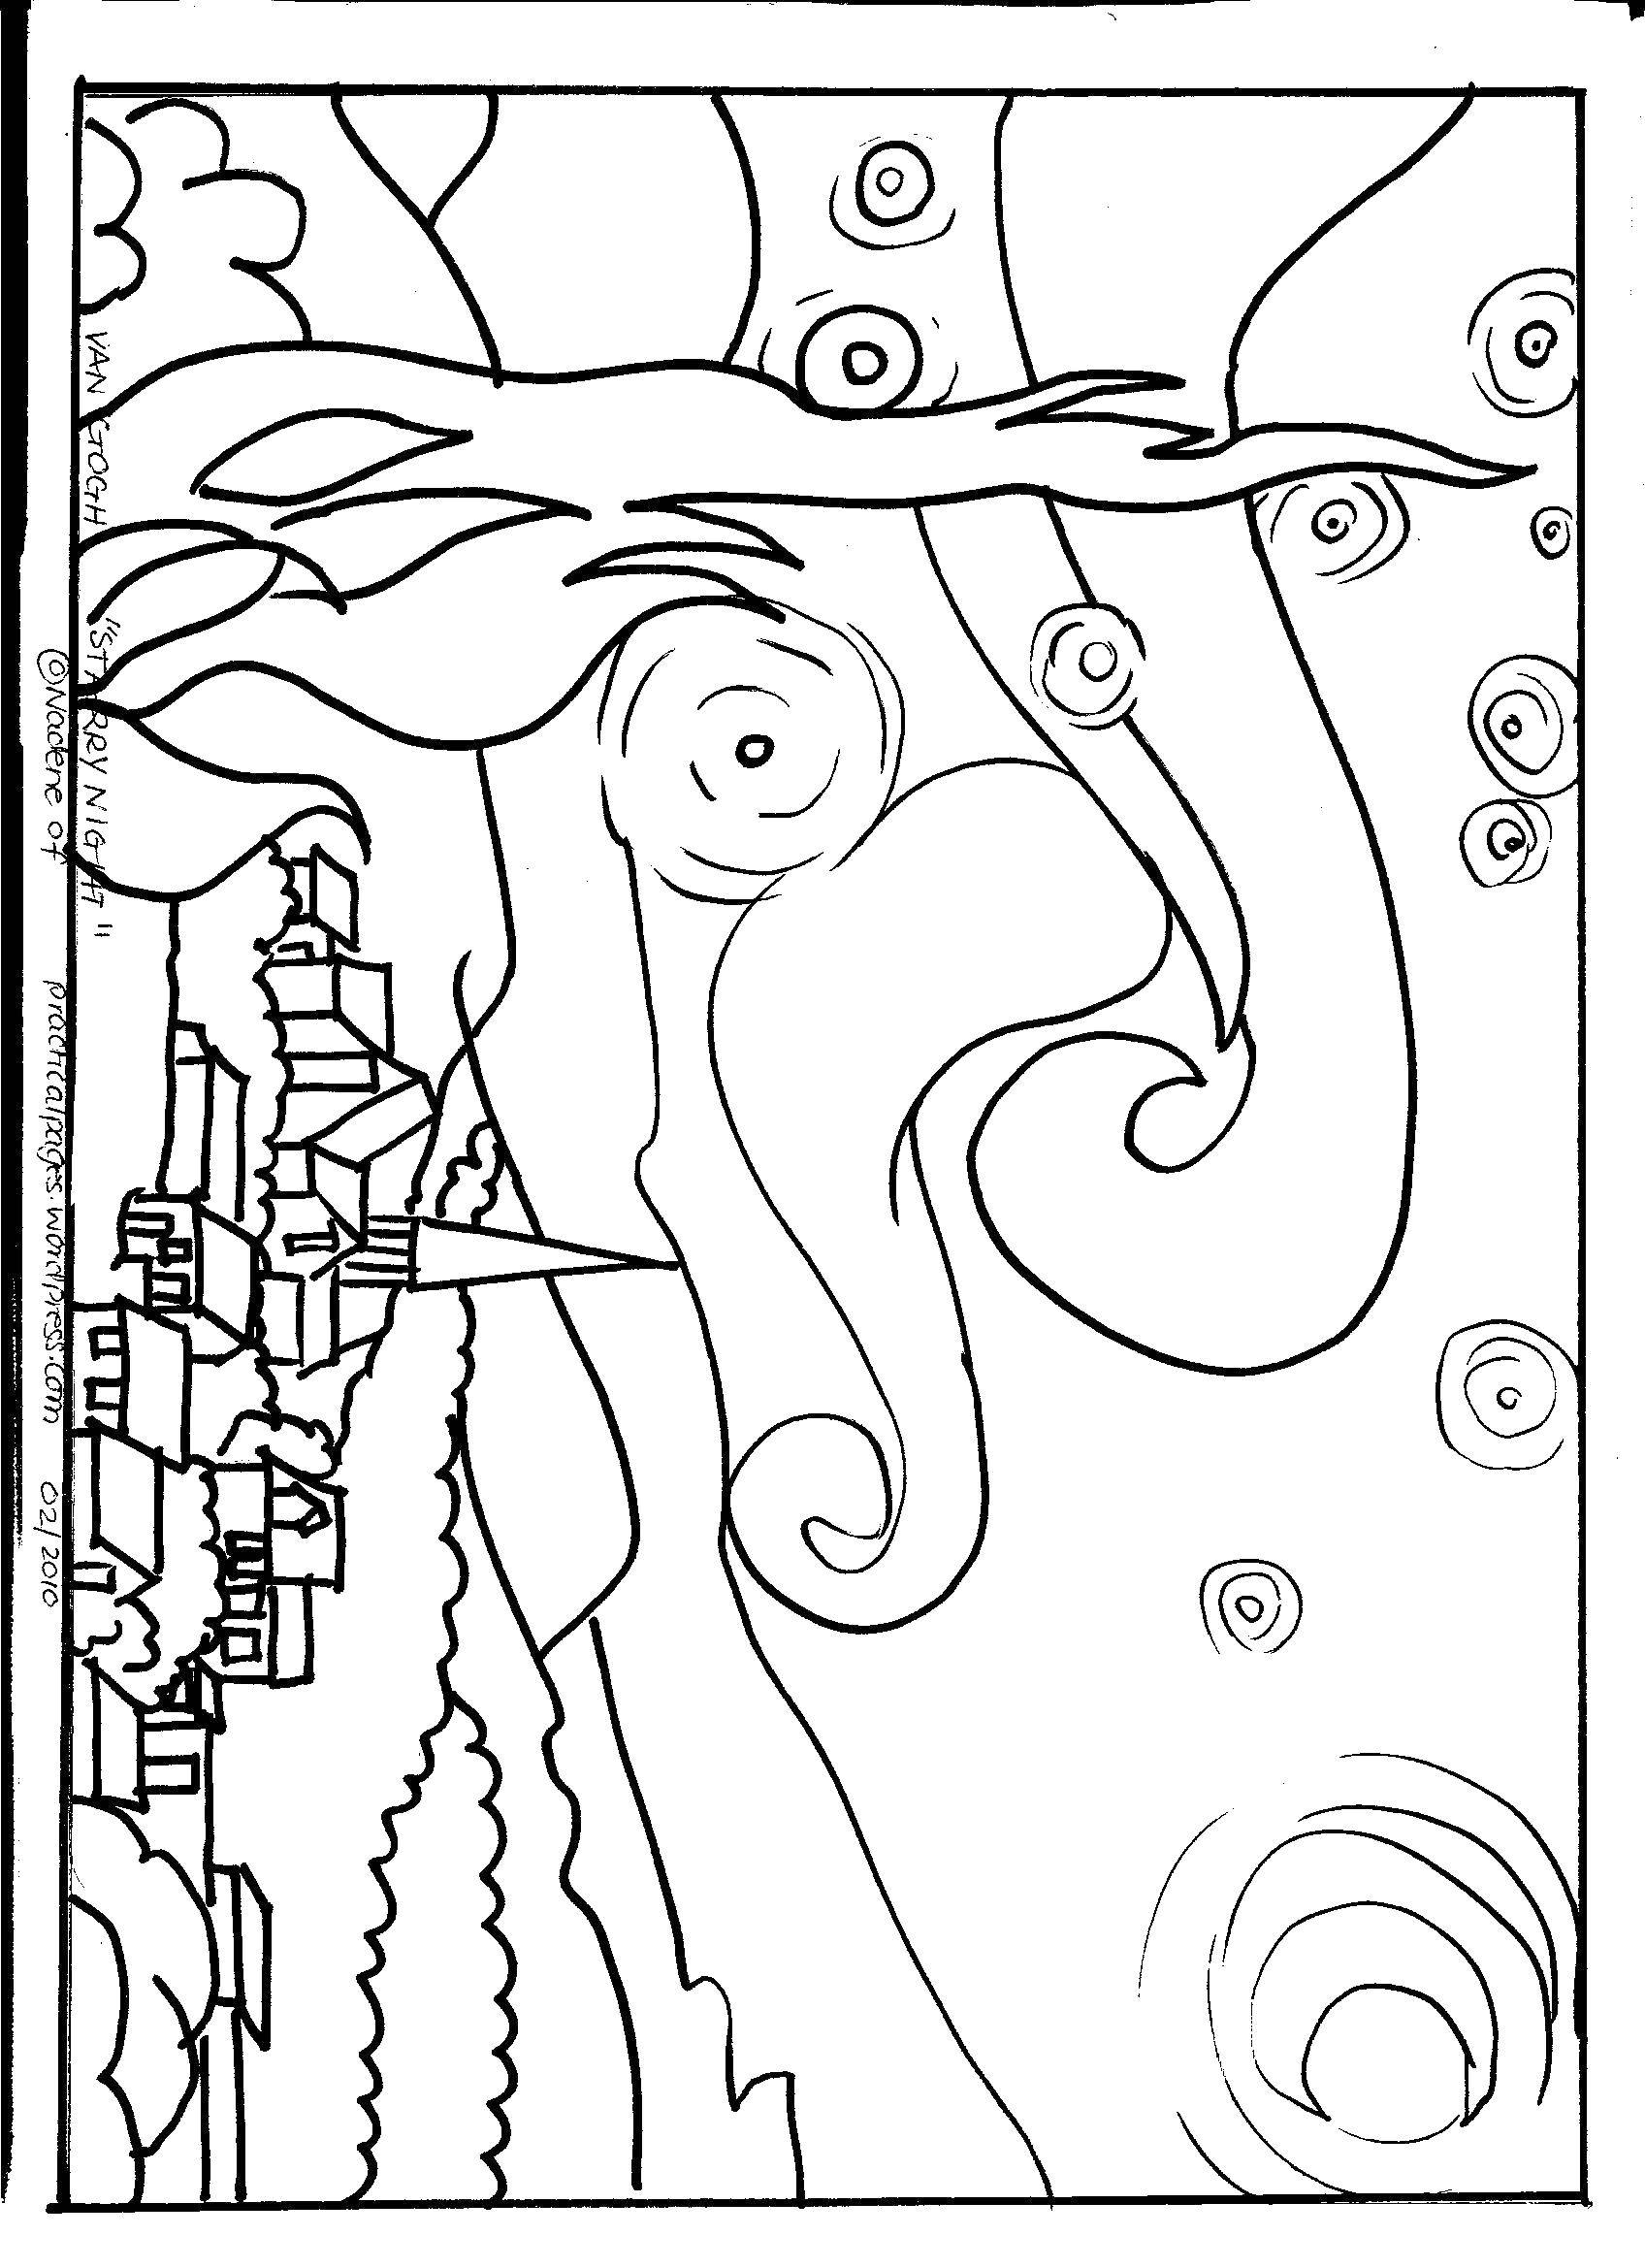 Coloring The picture of star o. Category coloring. Tags:  Van Gogh, painting, starry night.